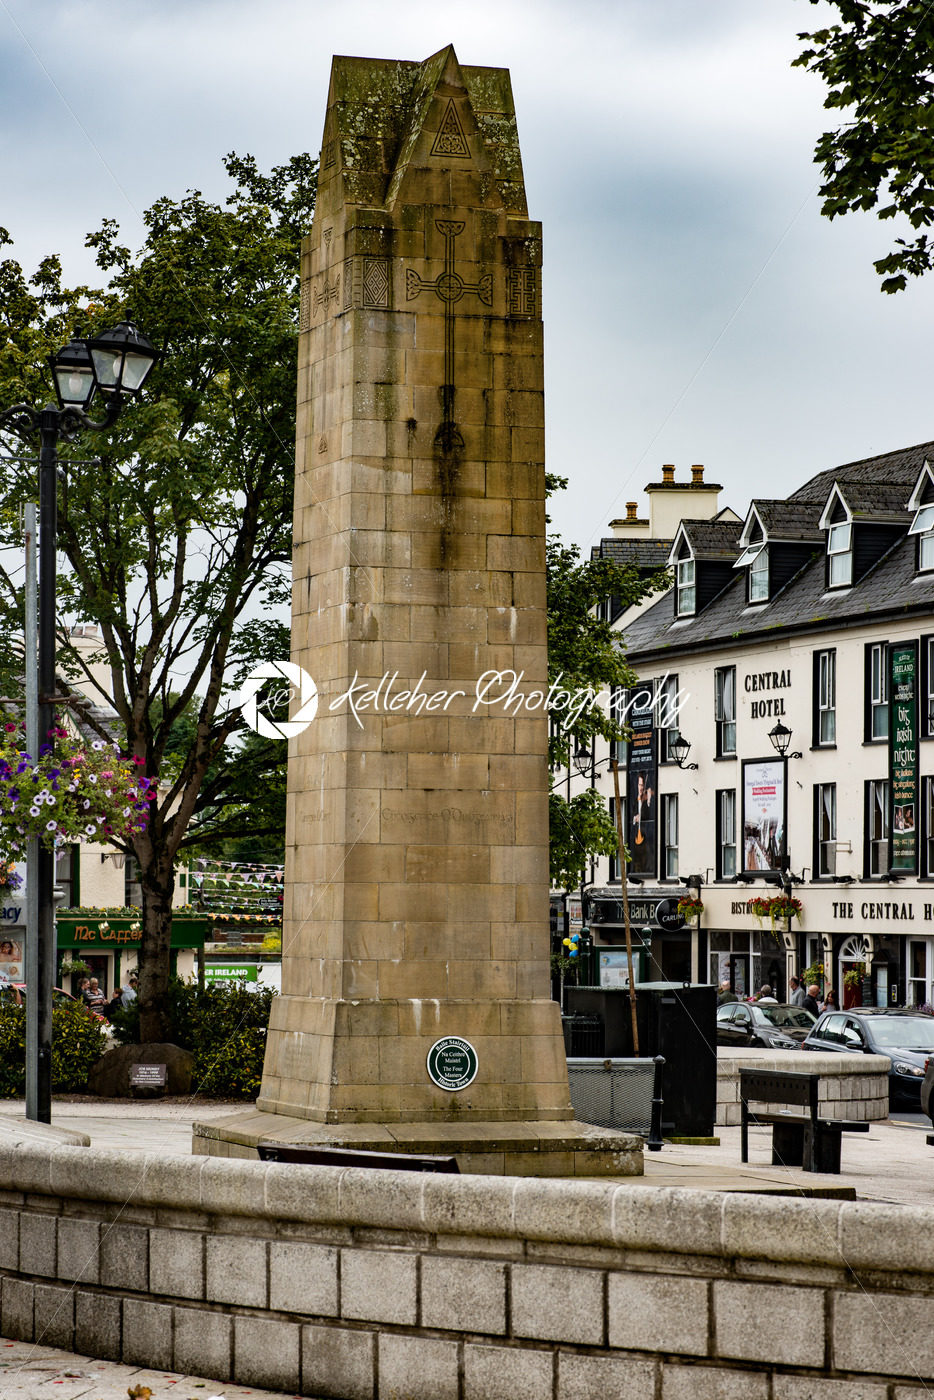 DONEGAL, IRELAND – AUGUST 25, 2017: Buildings in the city center of Donegal Ireland - Kelleher Photography Store